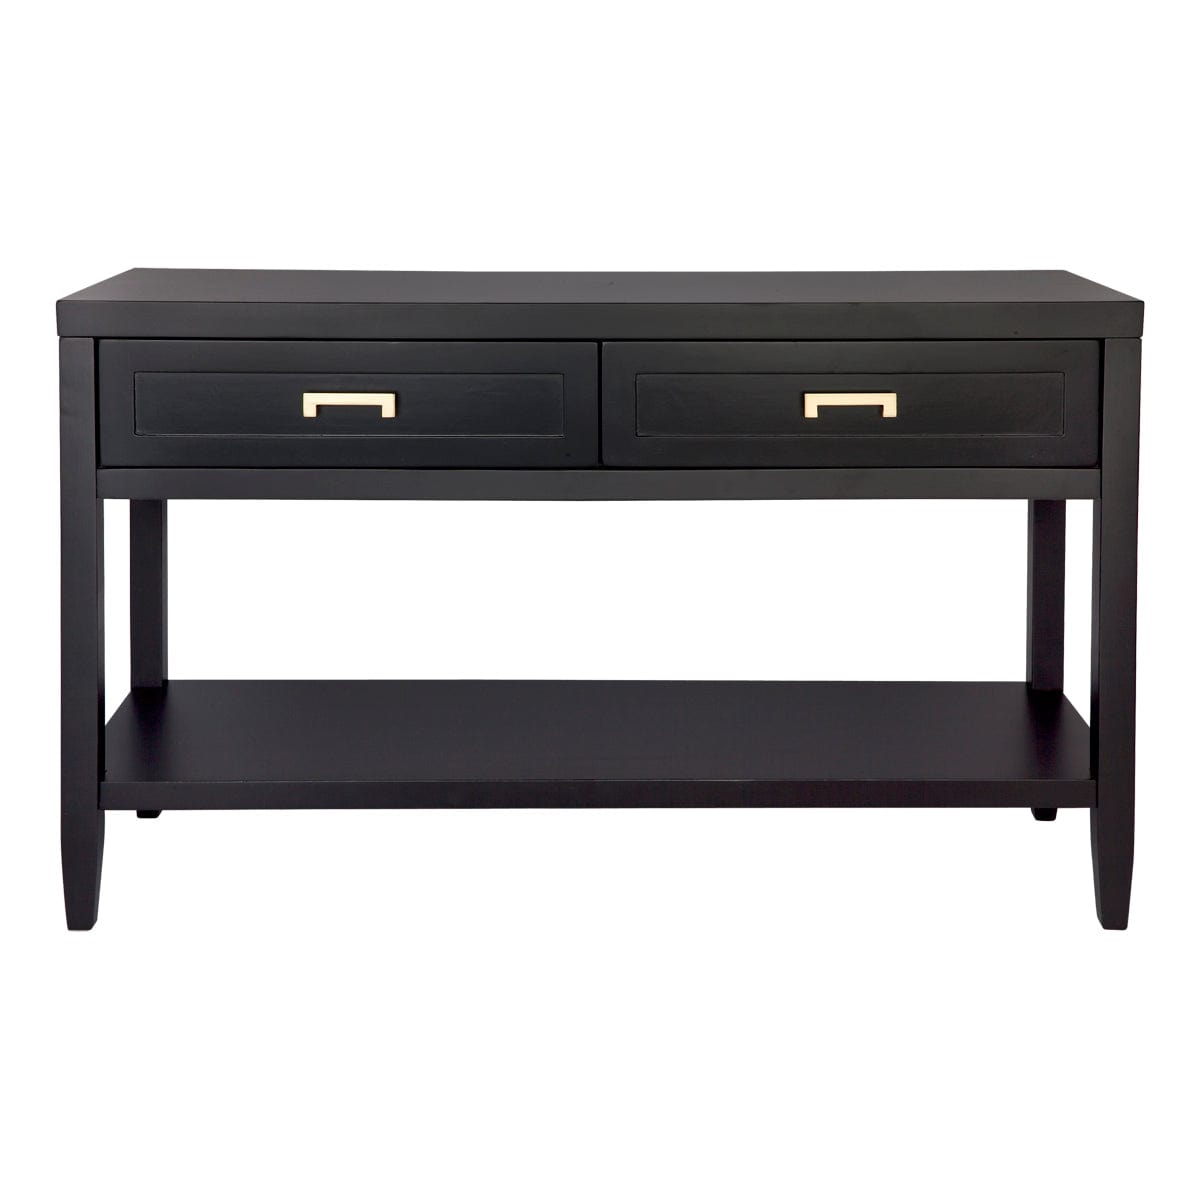 Cafe Lighting & Living Soloman Console Table - Small Black